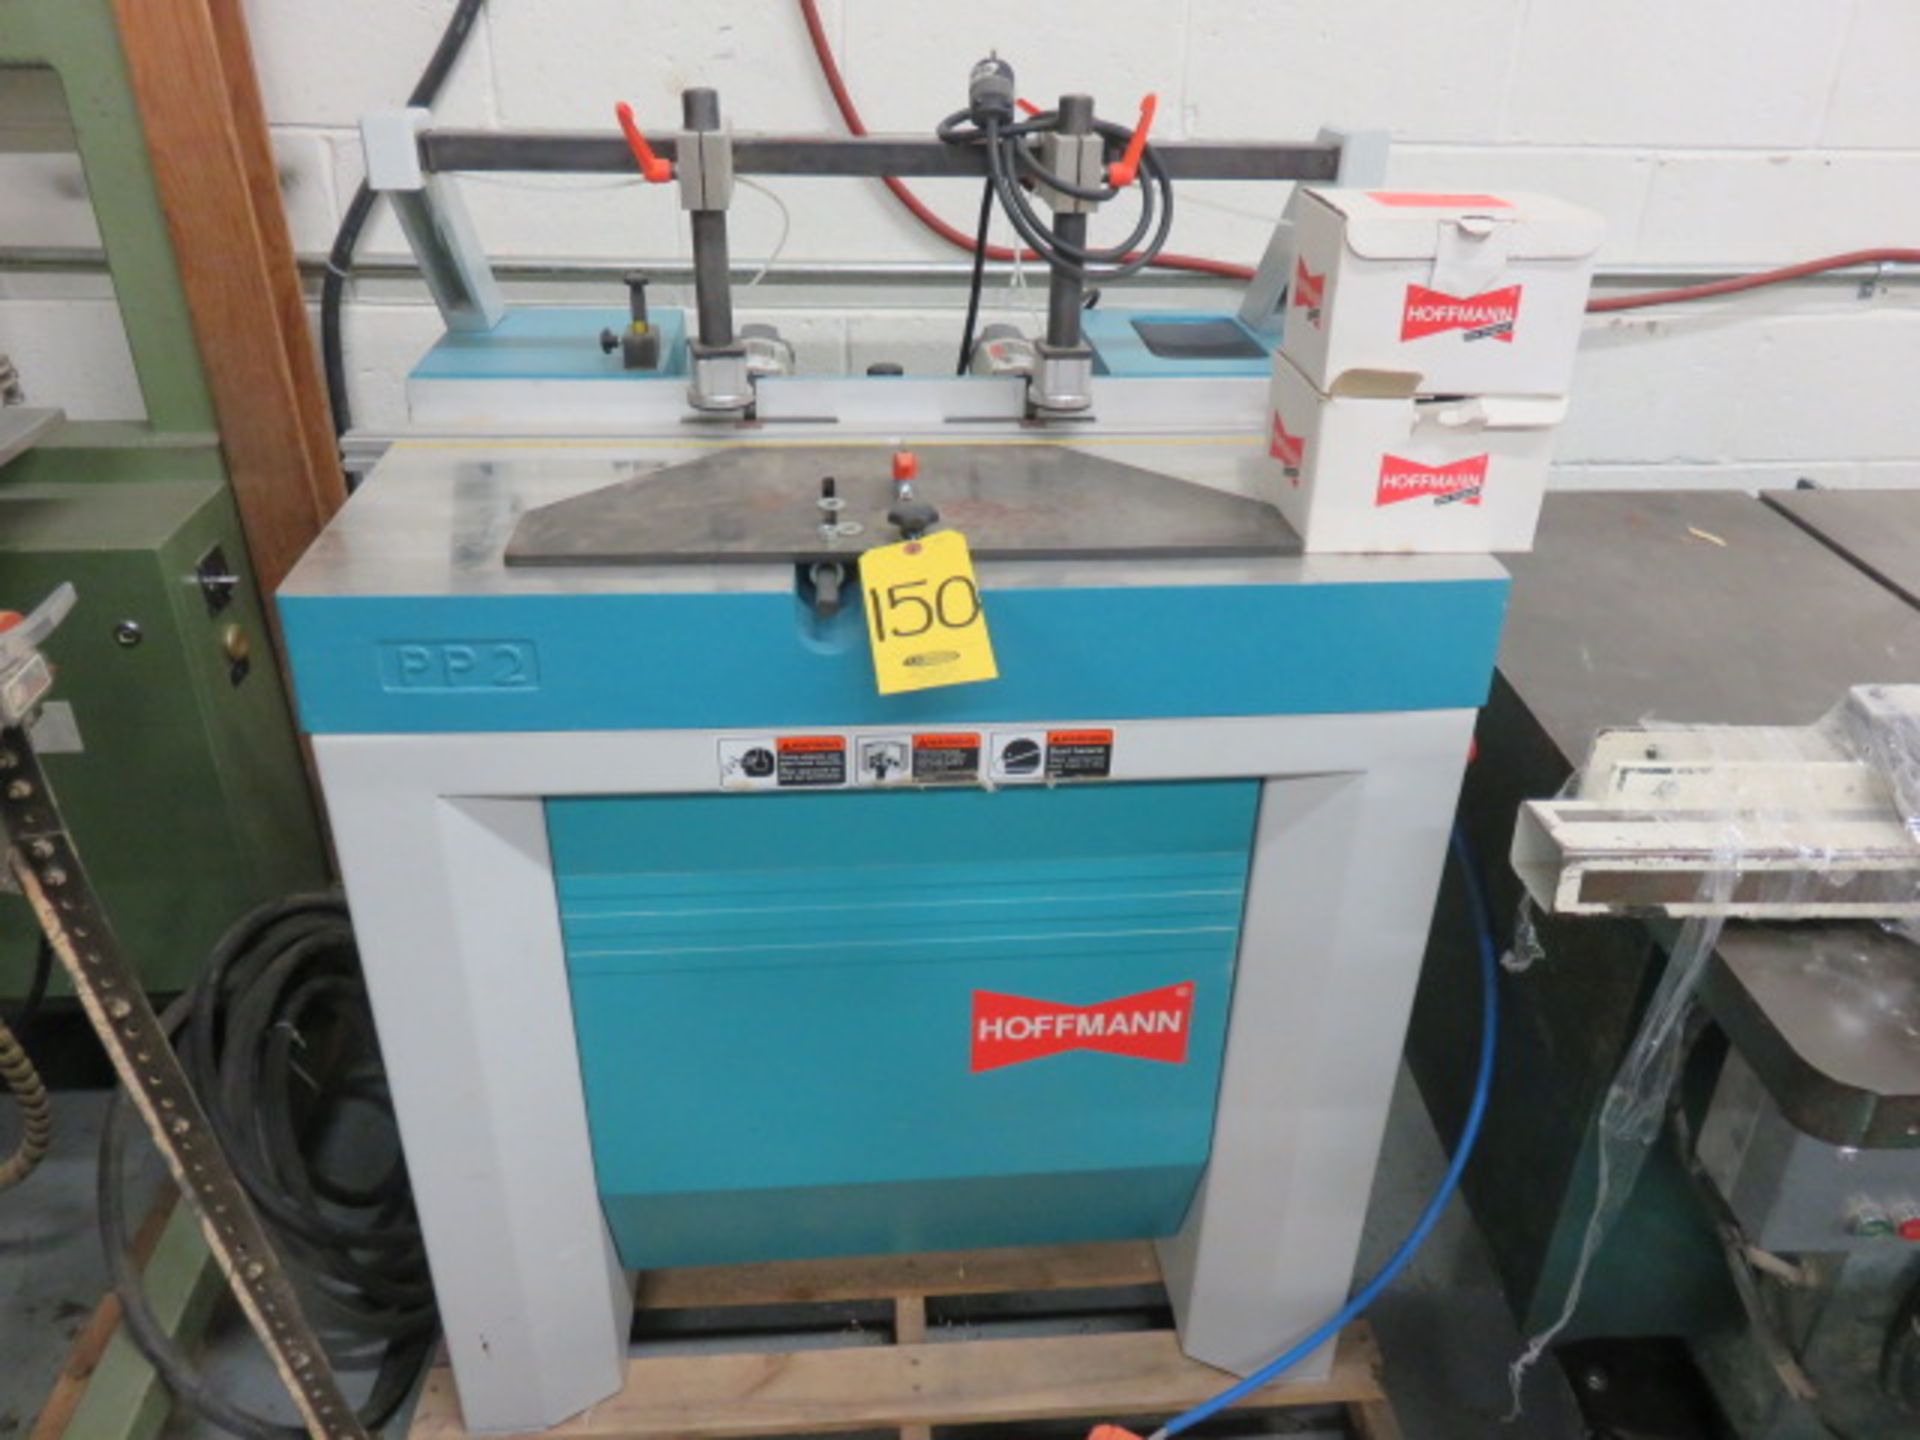 2006 HOFFMAN PP2 DOVETAIL MACHINE, S/N 35851, USED FOR ONE JOB